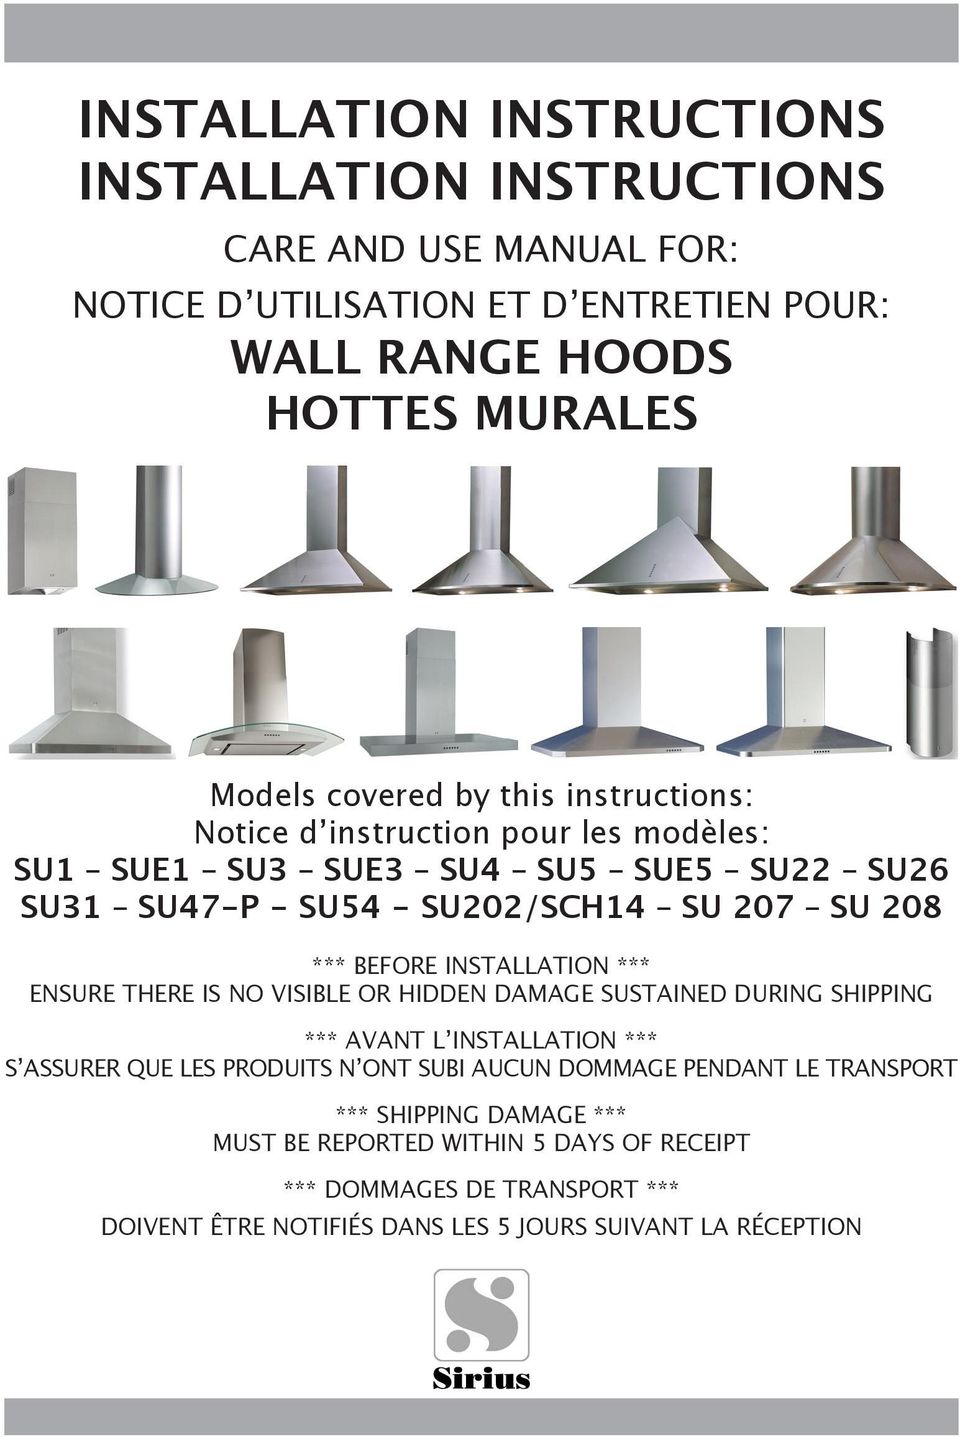 INSTALLATION *** ENSURE THERE IS NO VISIBLE OR HIDDEN DAMAGE SUSTAINED DURING SHIPPING *** AVANT L INSTALLATION *** S ASSURER QUE LES PRODUITS N ONT SUBI AUCUN DOMMAGE